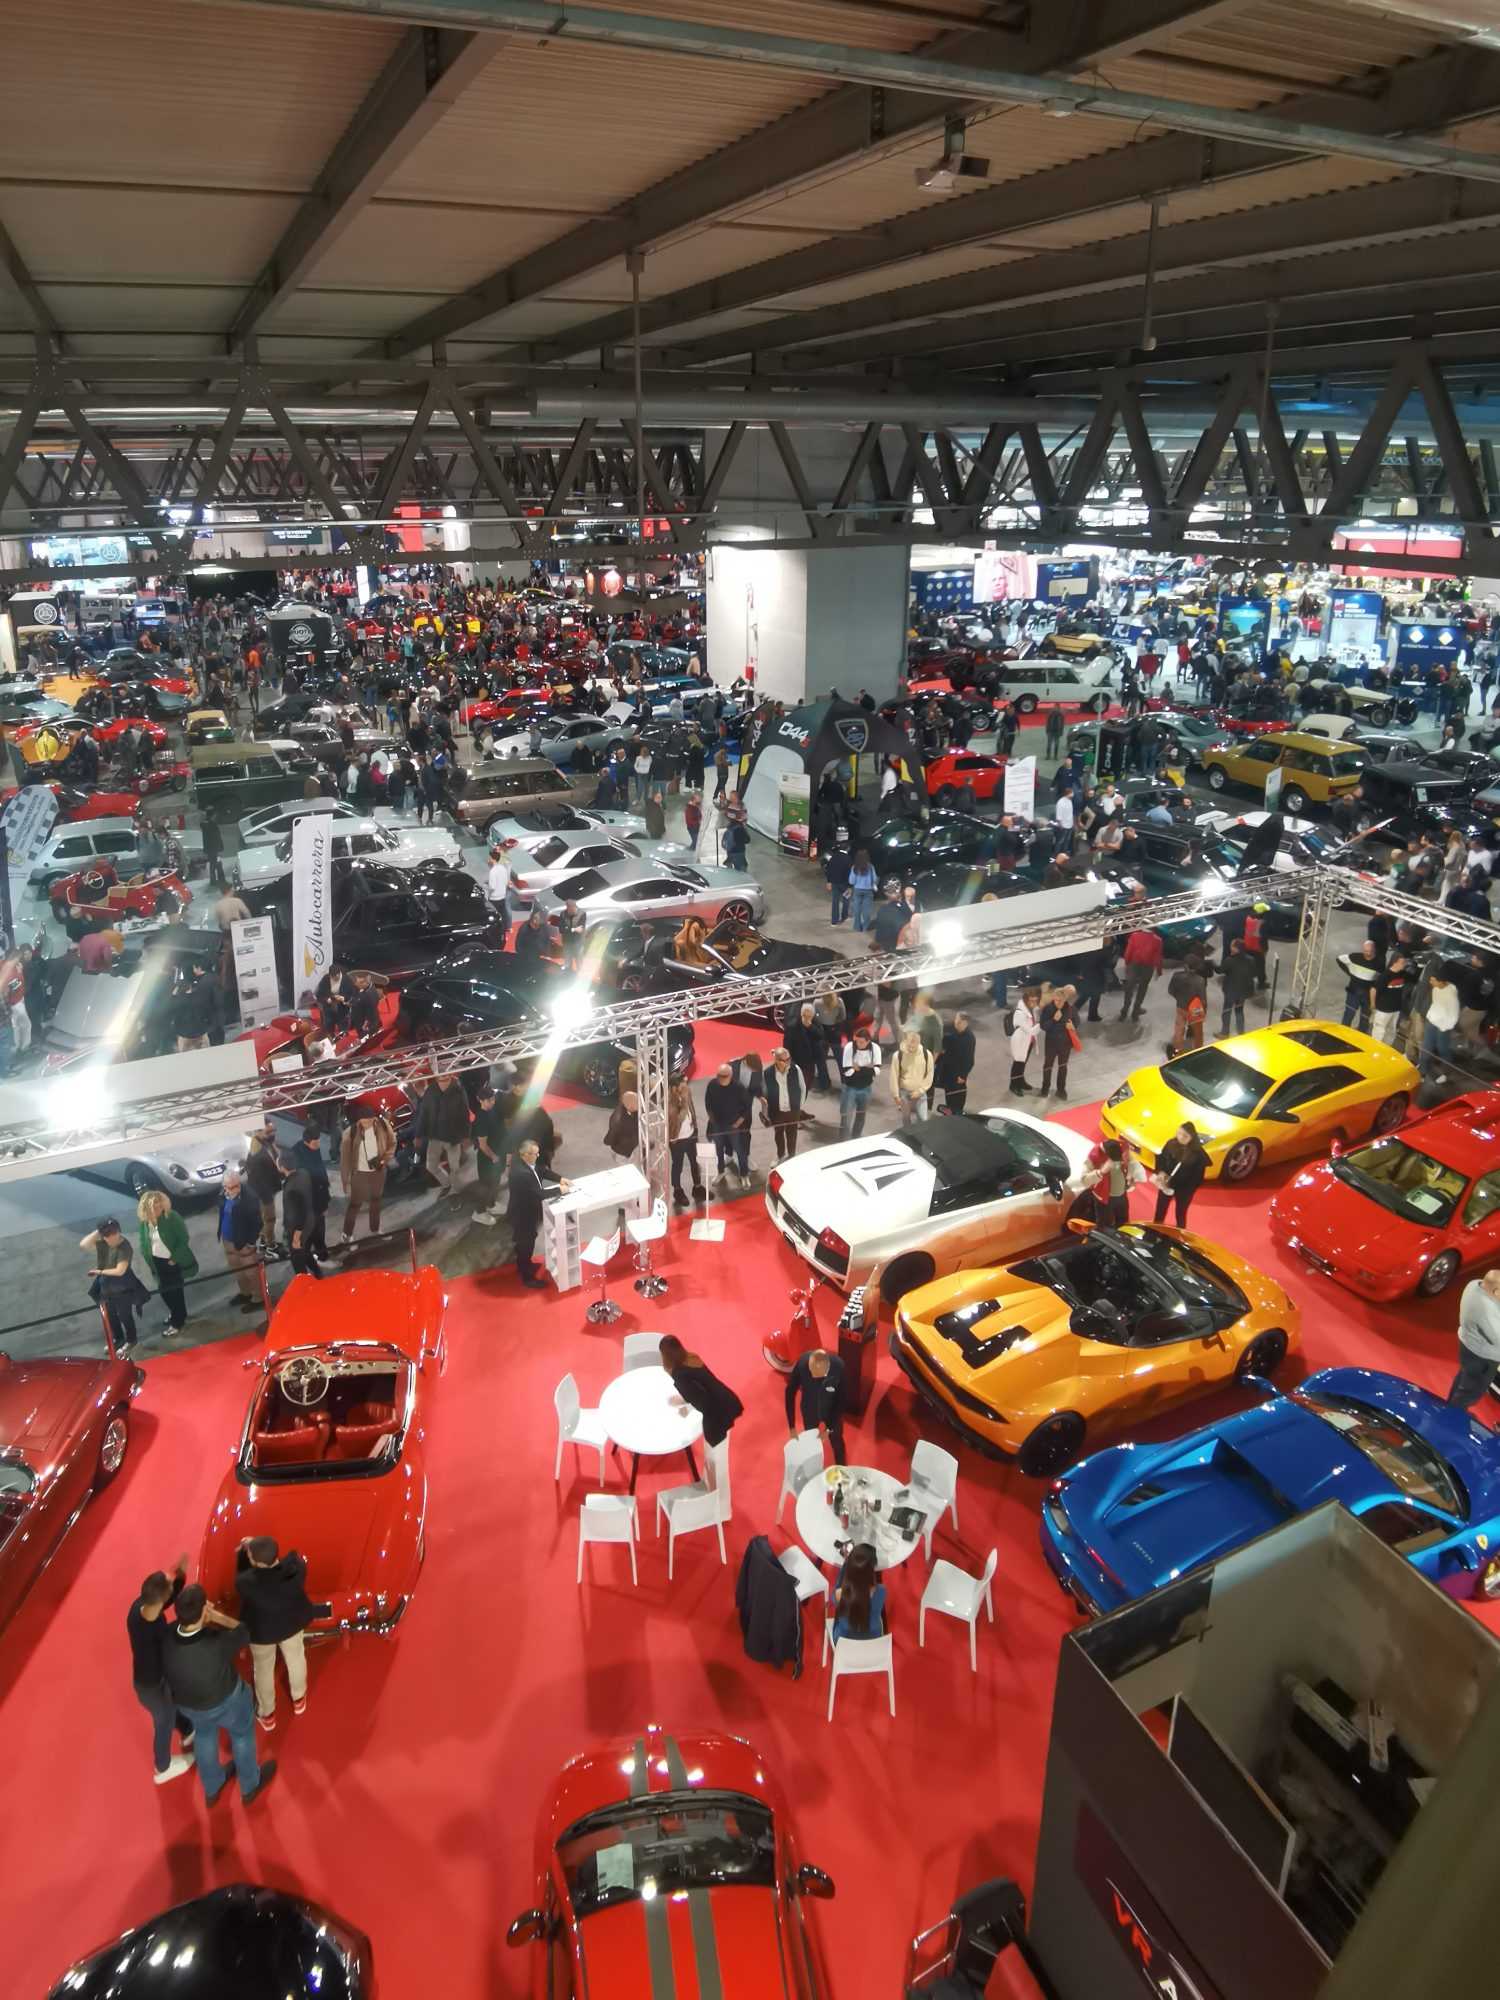 Milano AutoClassica 2023: here is the hall of wonders!